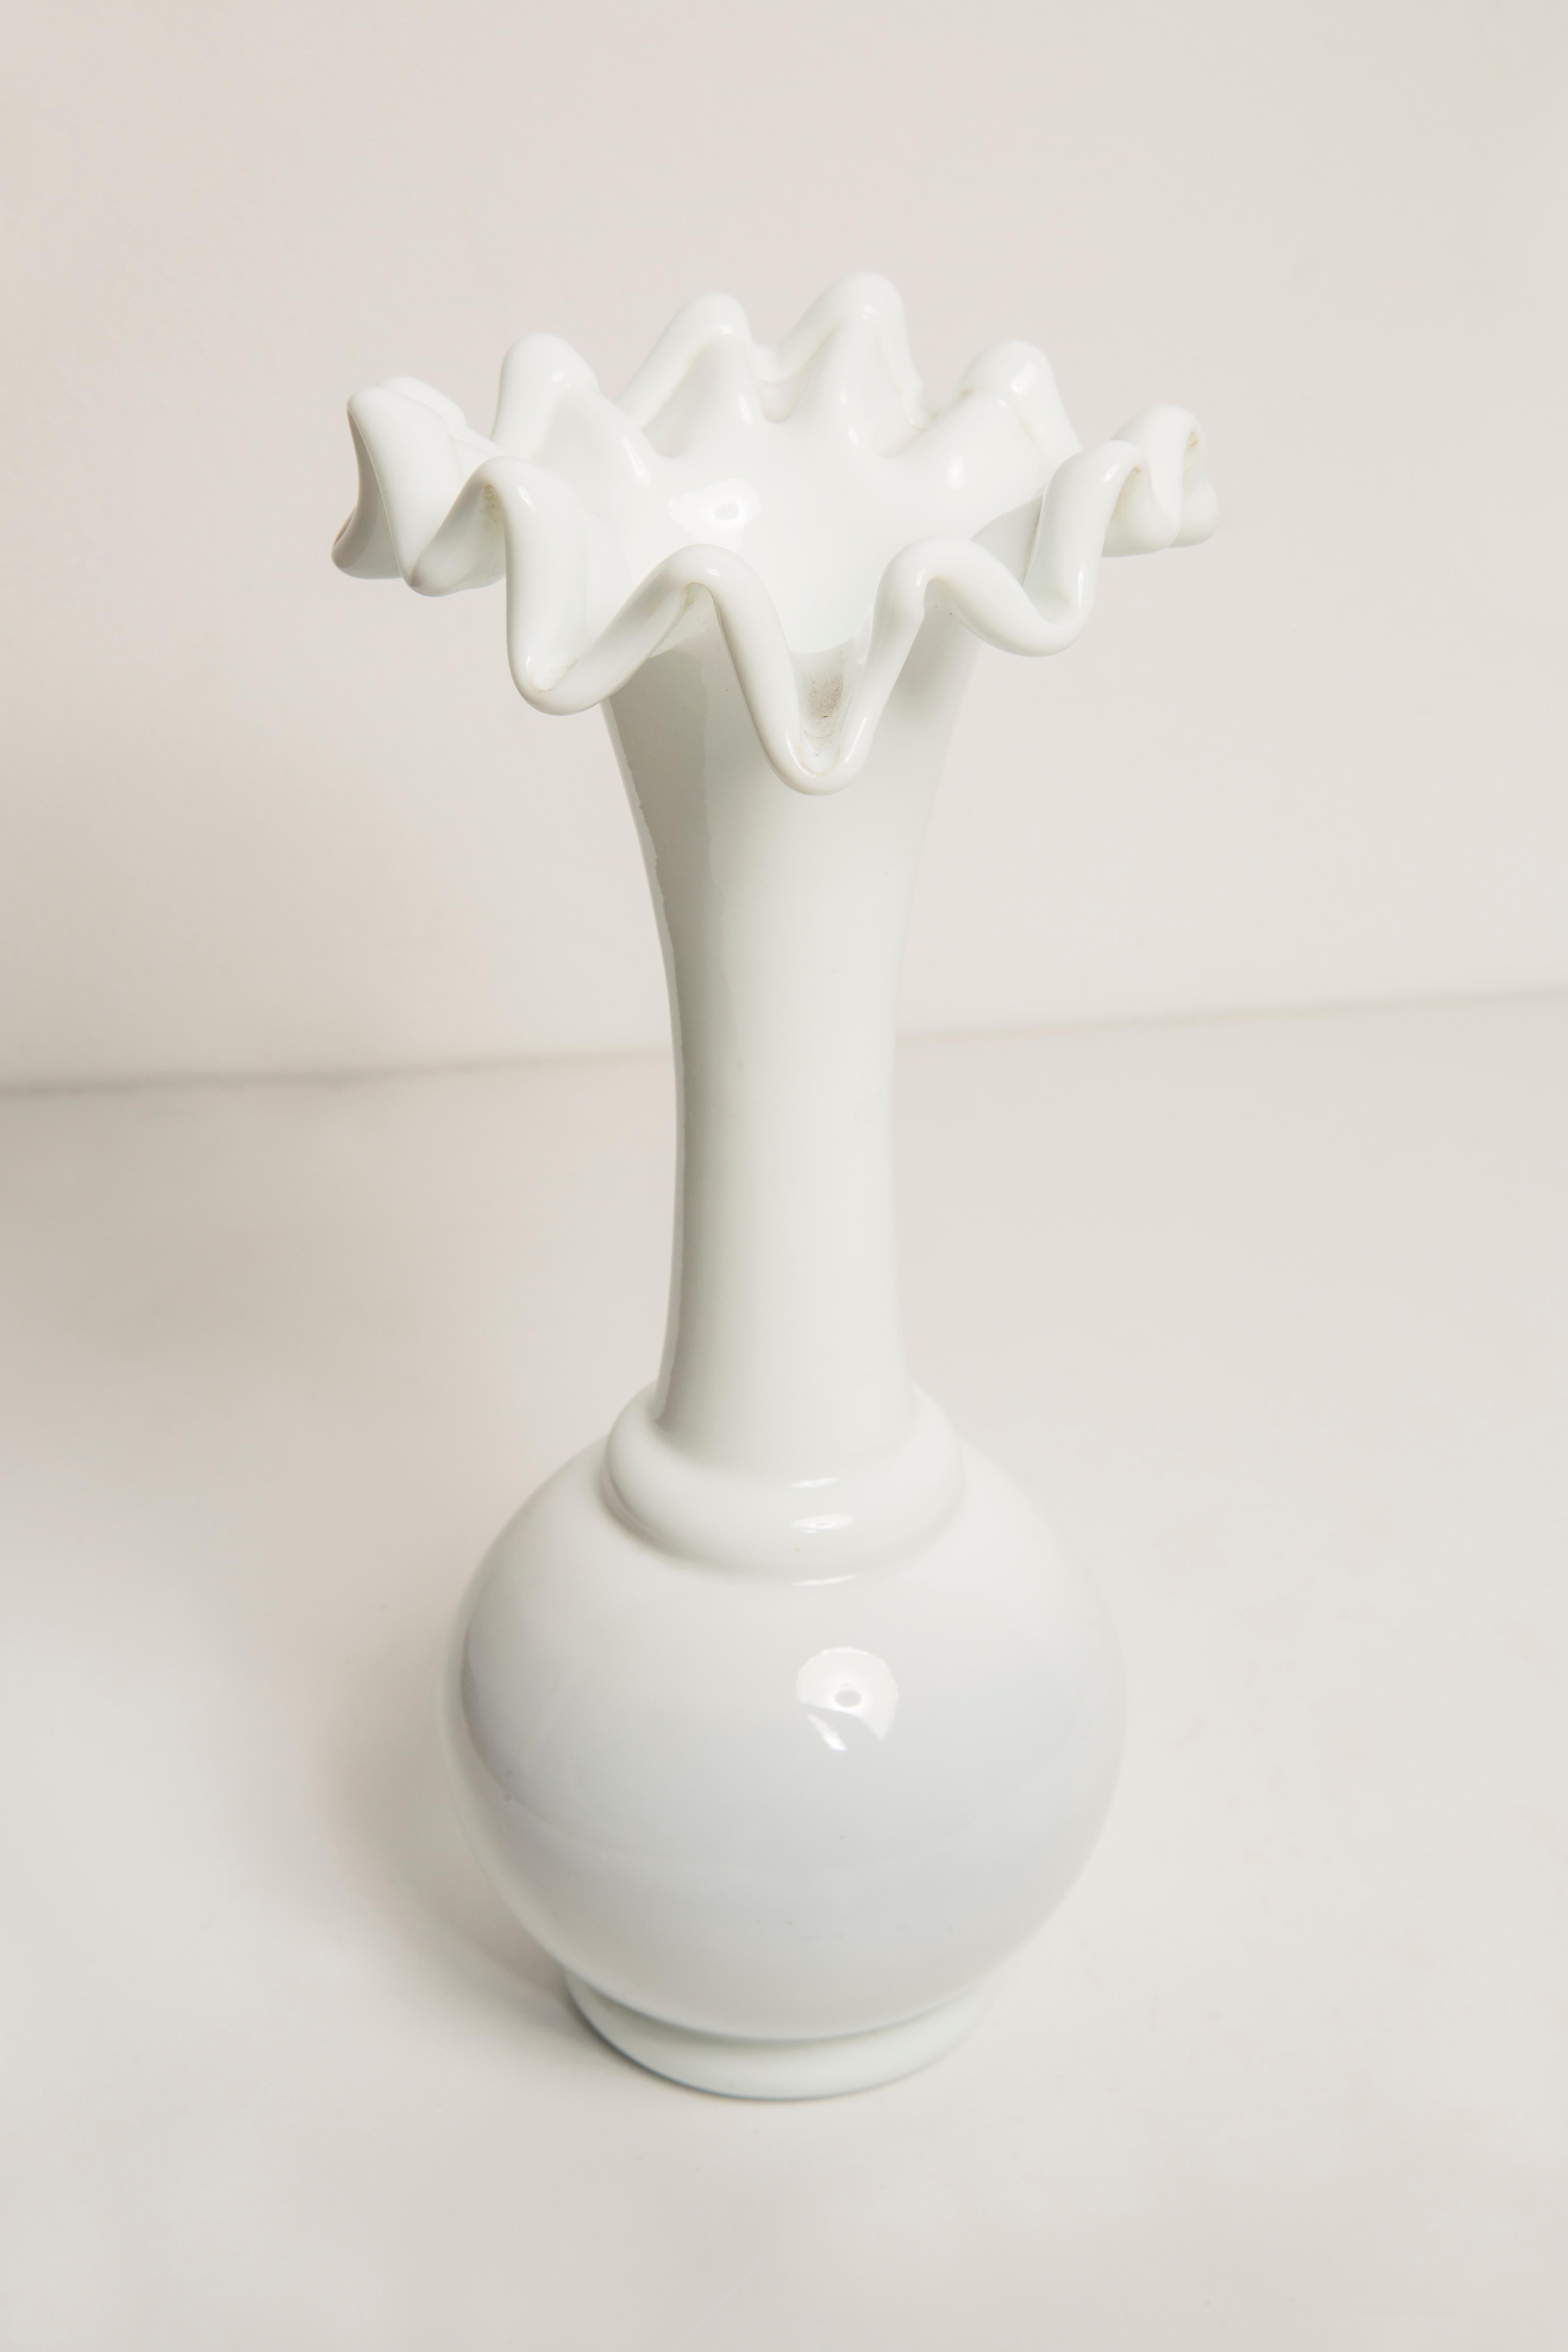 Glass Midcentury Porcelain White Mini Vase with a Frill, Europe, 1960s For Sale